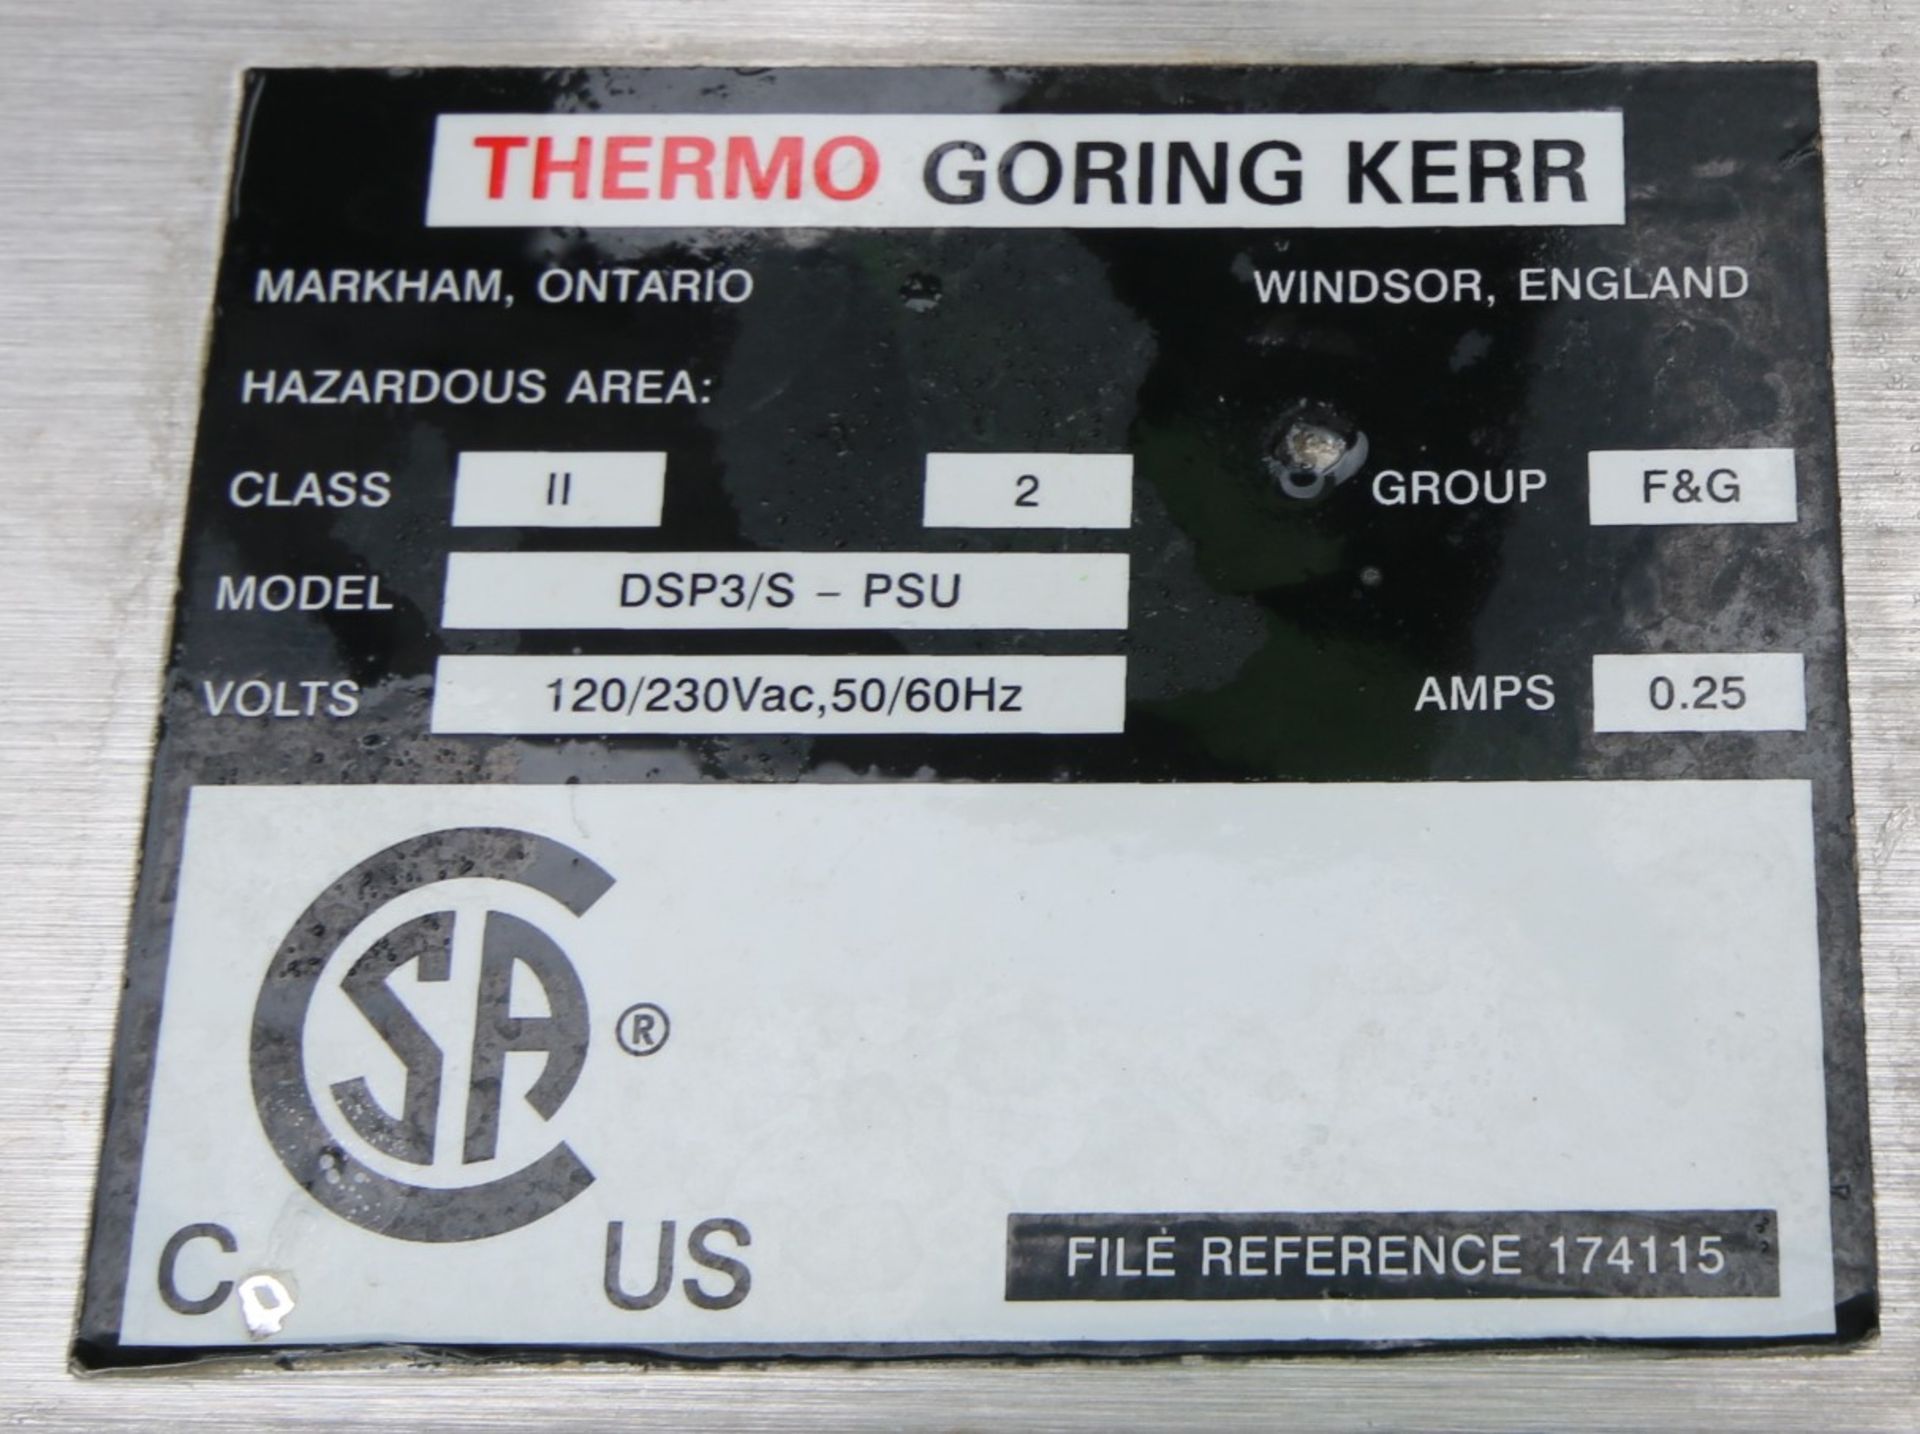 Thermo / Goring Kerr S/S Metal Detector System, Model DSP3/S - PSU, Product Opening 37 1/2" W x 2 - Image 5 of 5